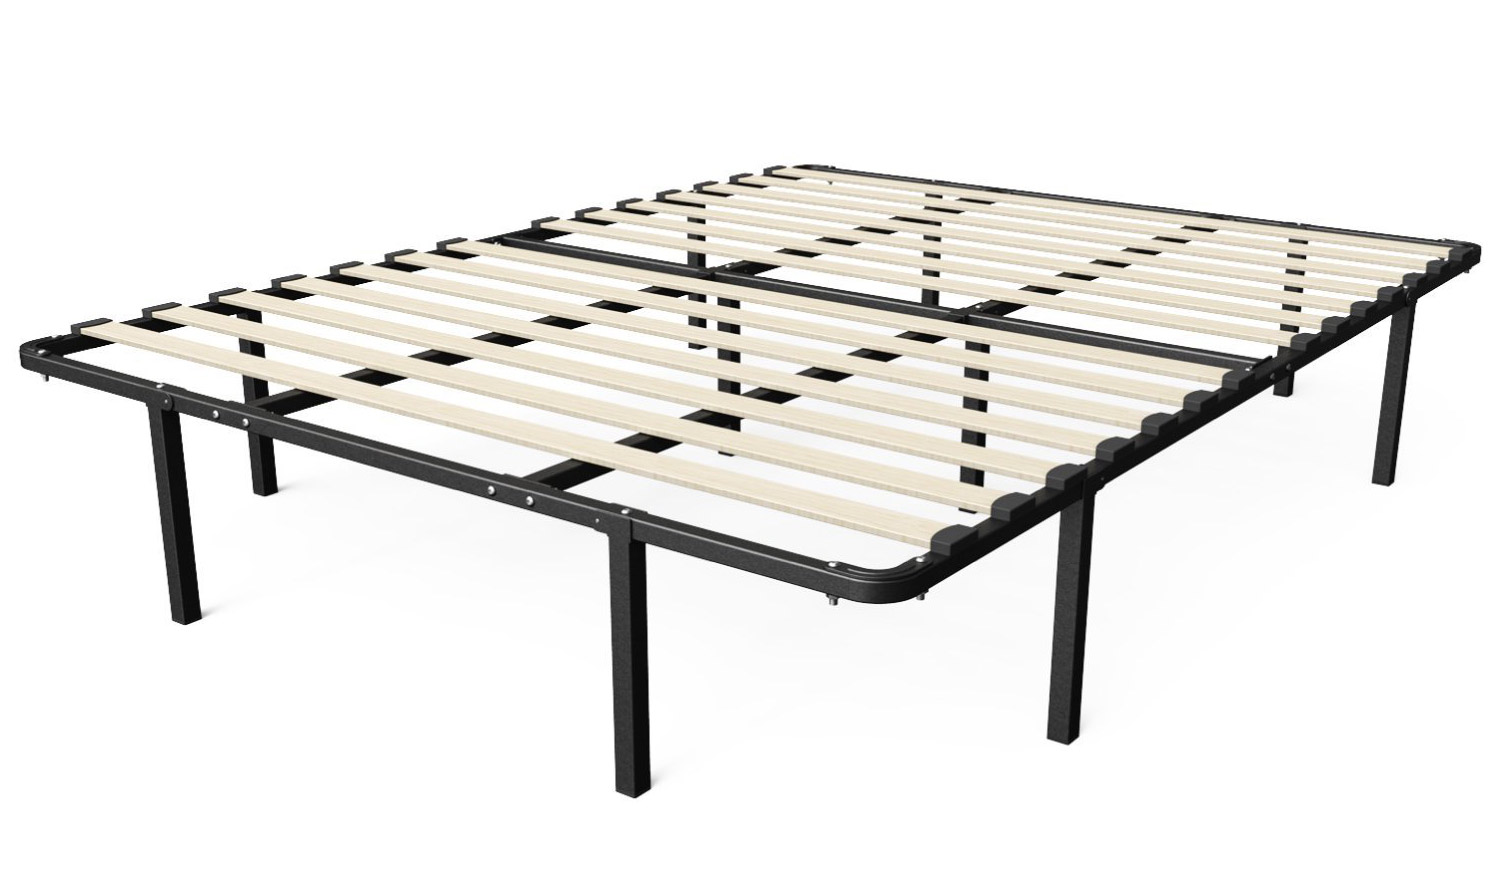 GreenHome123 Full Size Metal Platform Bed Frame with Wood Slats - No Box-spring Needed